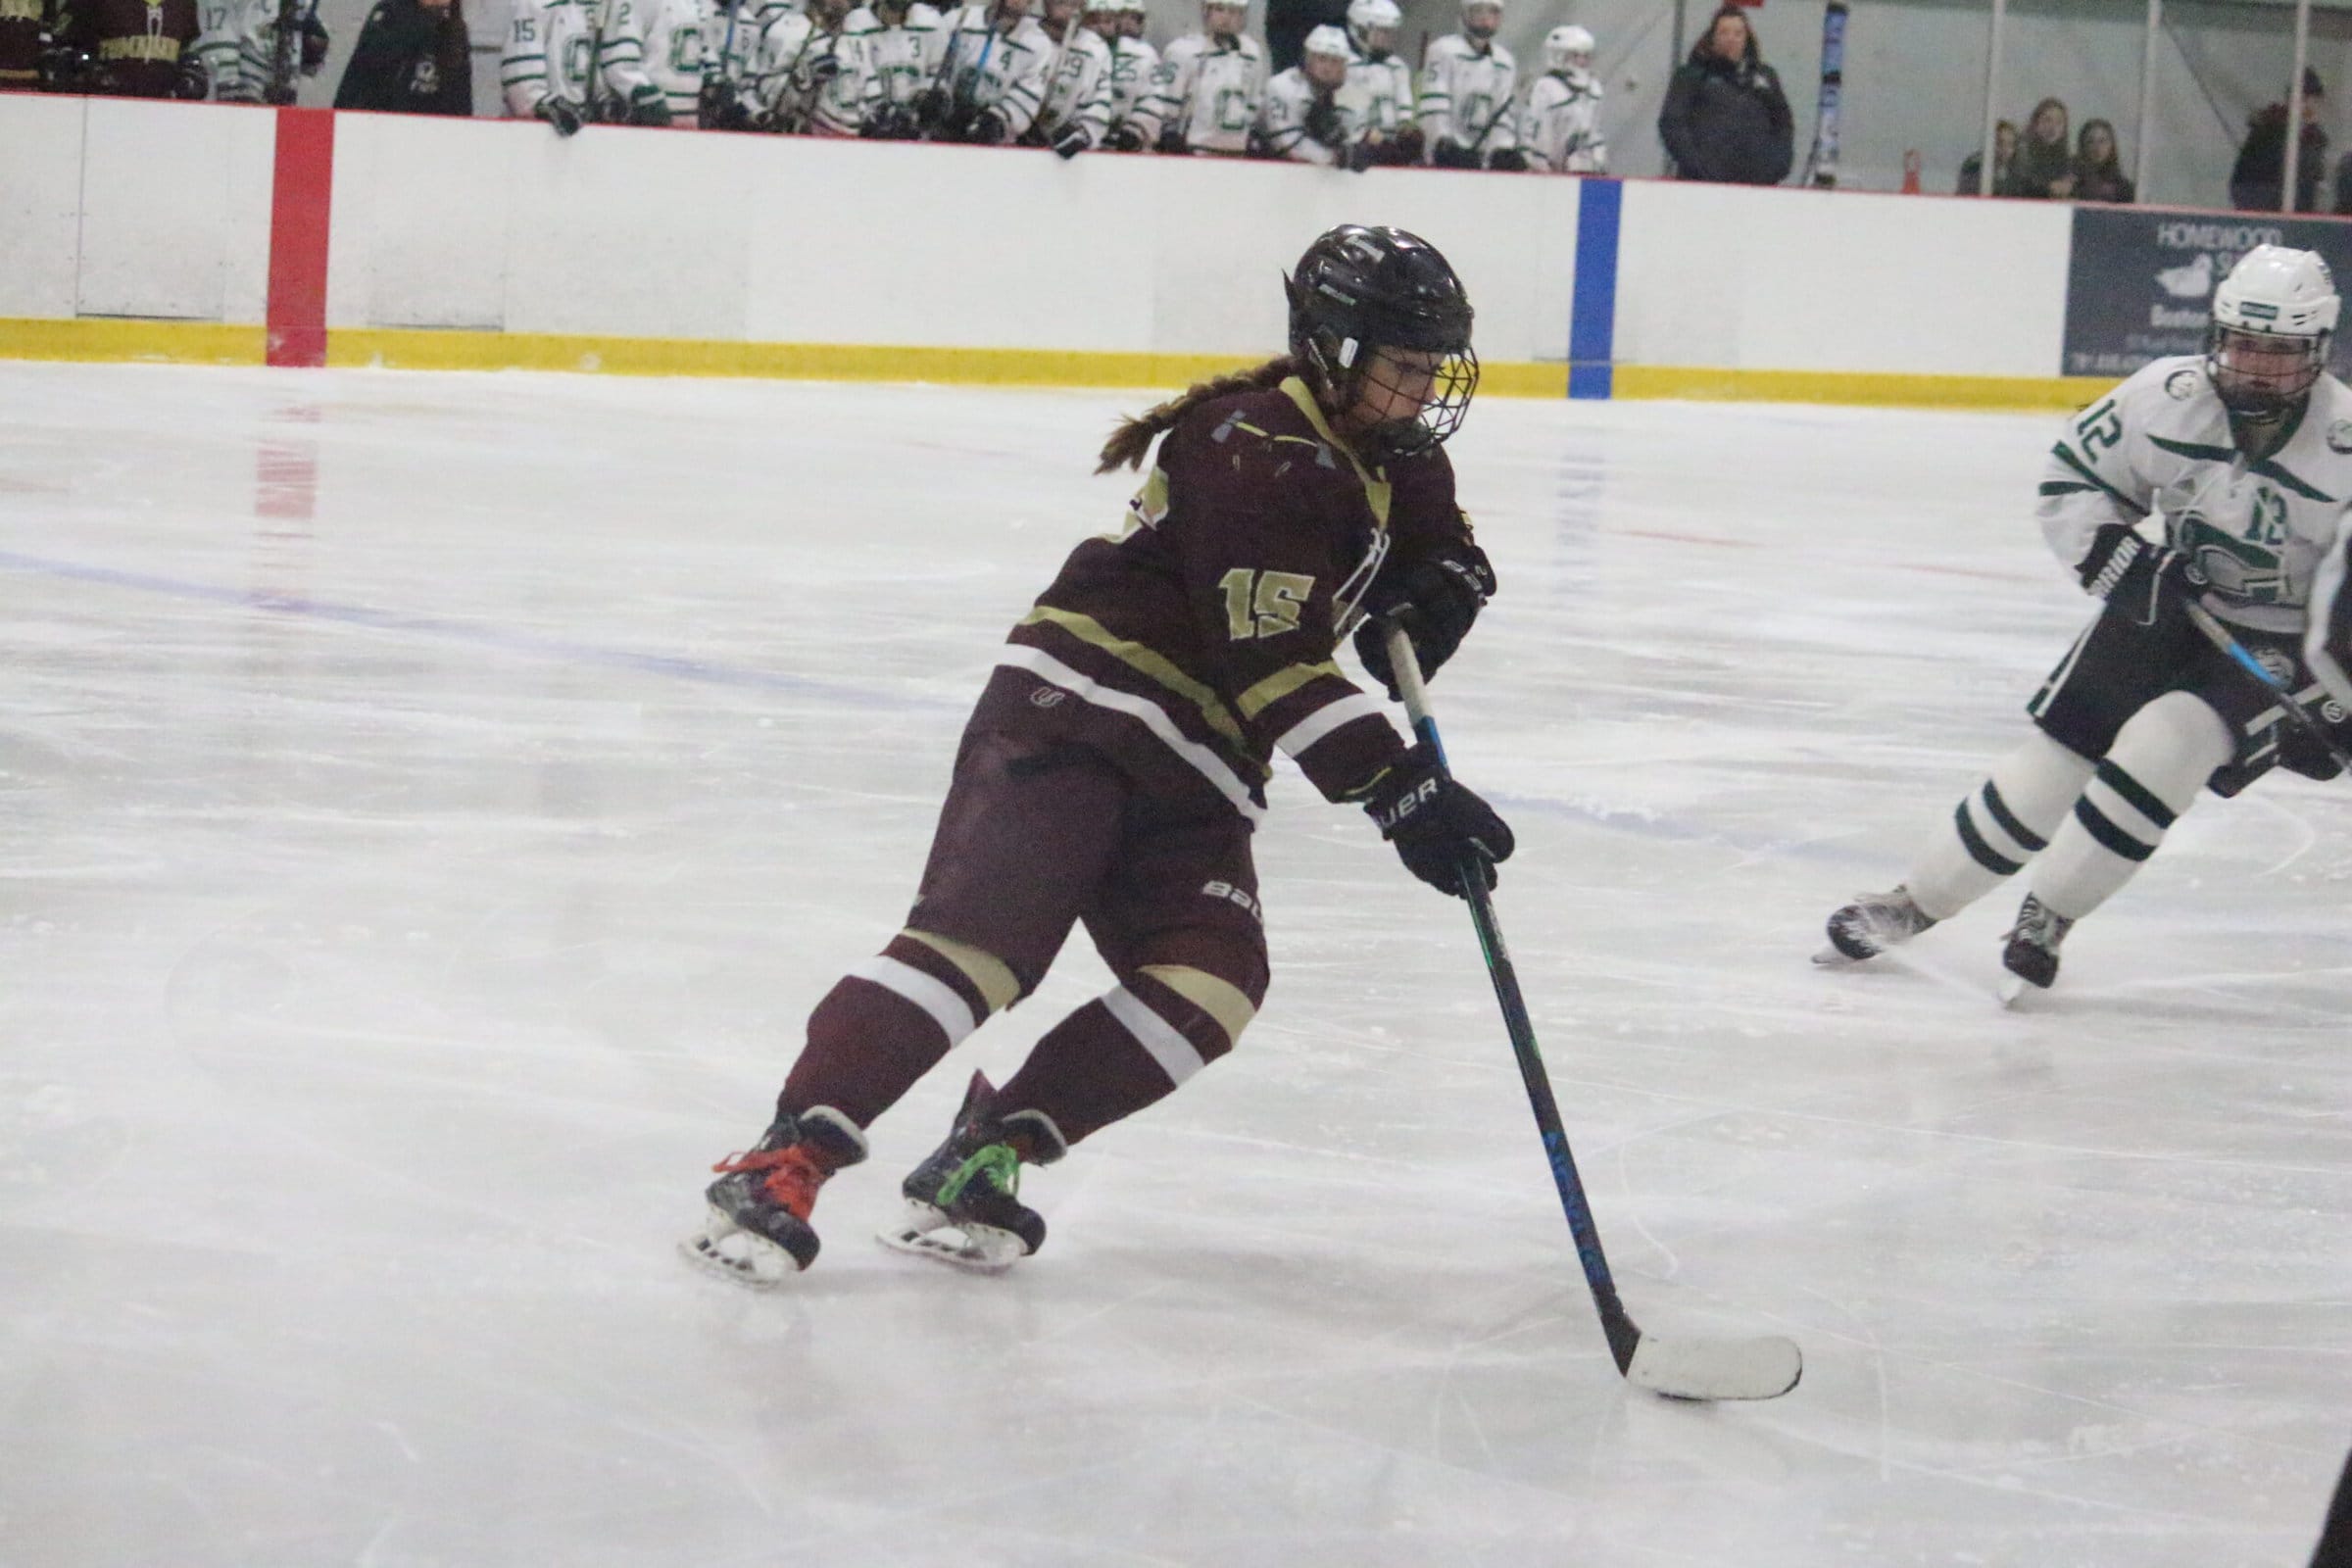 &#8216;They gave everything that they had:&#8217; Algonquin hockey falls in Elite 8